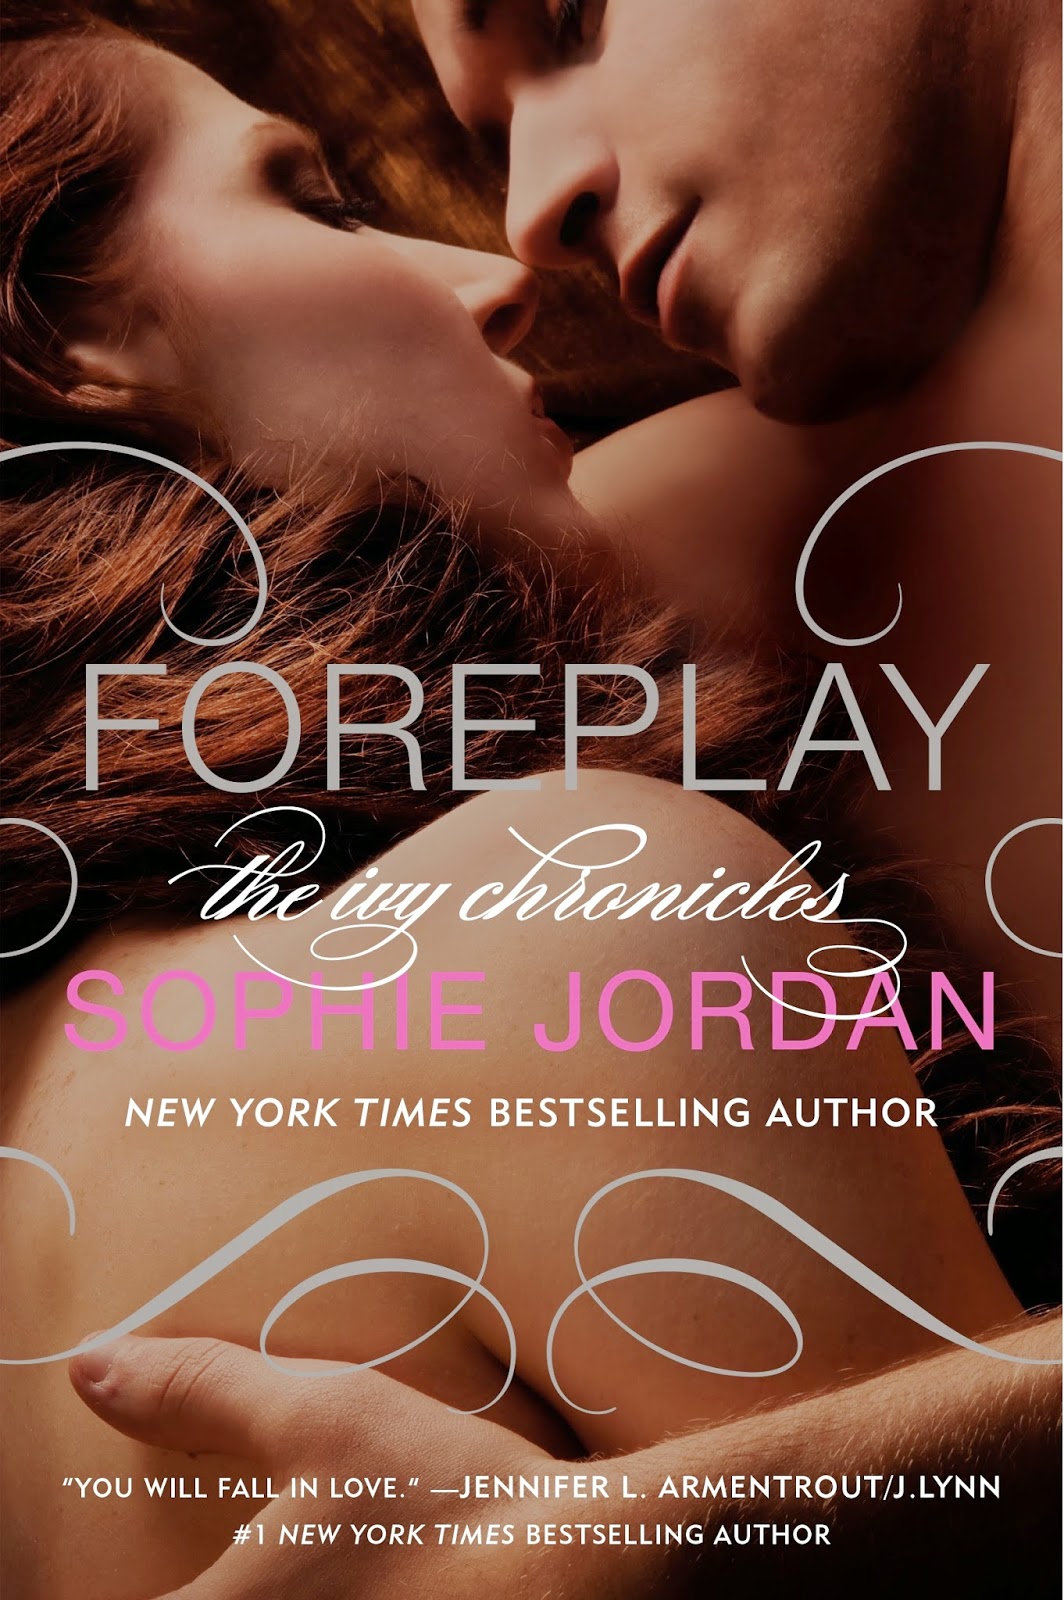 https://www.goodreads.com/book/show/17254035-foreplay?ac=1